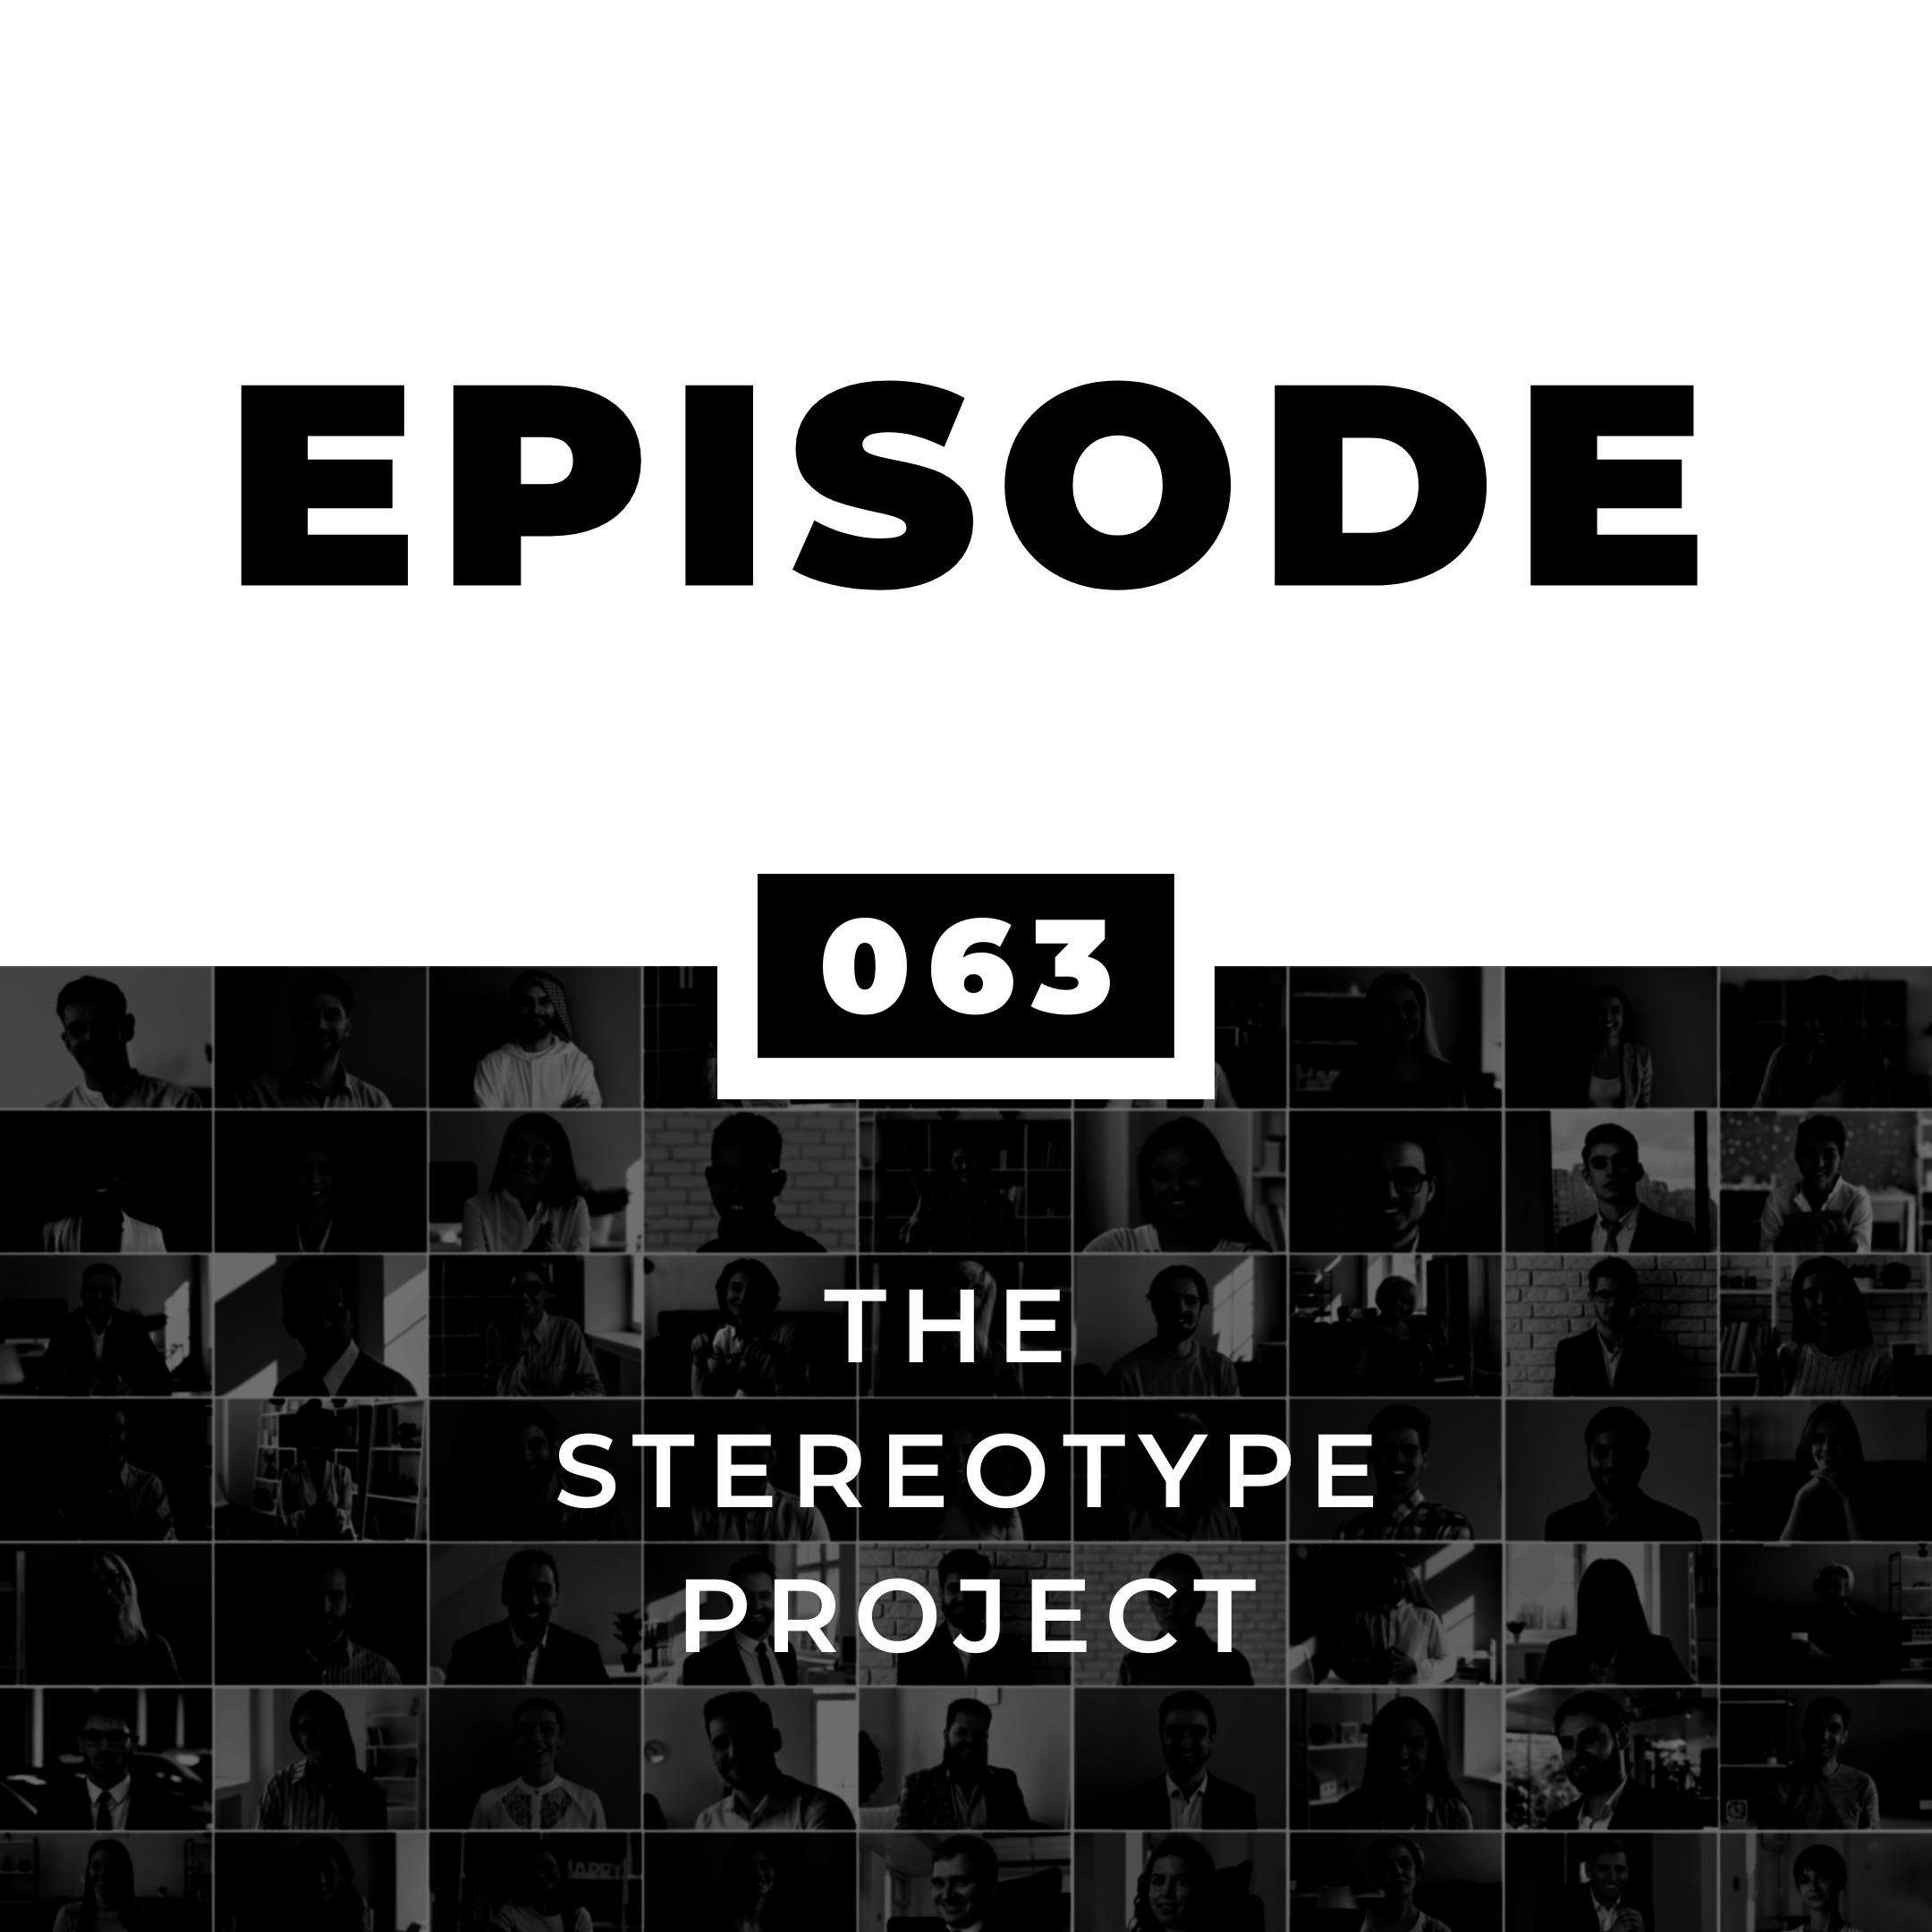 The Stereotype Project